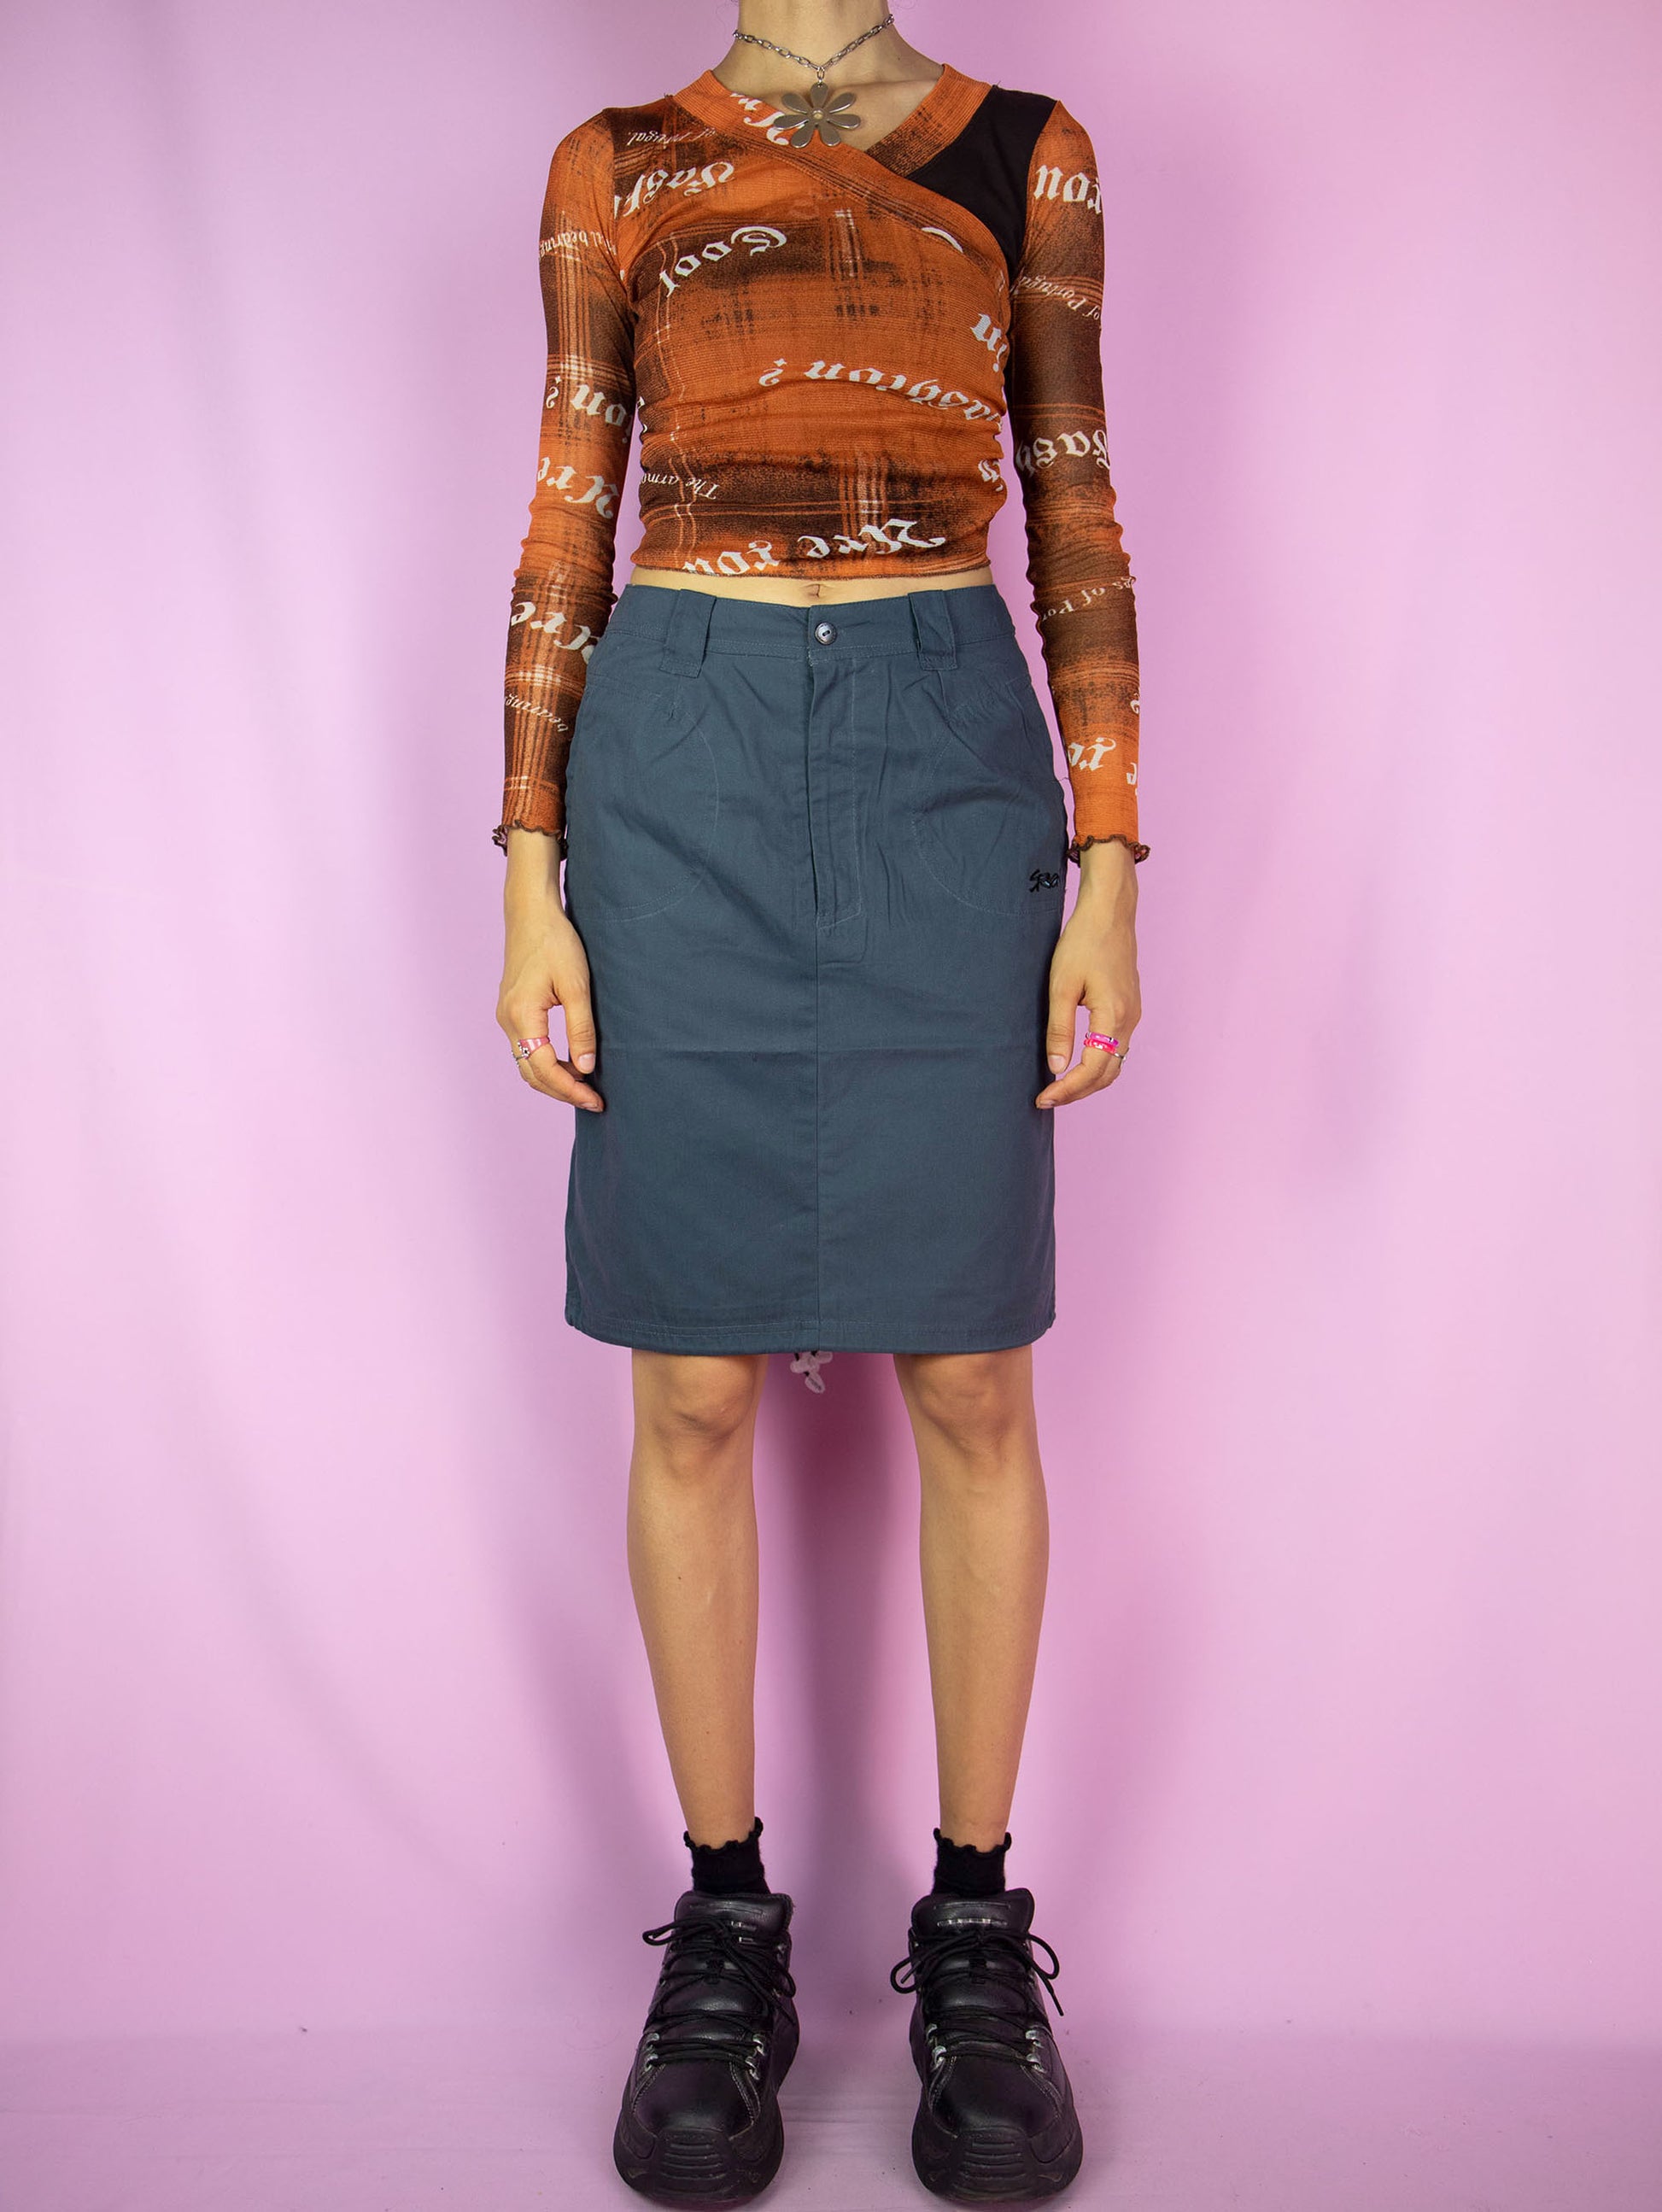 The Vintage Y2K Blue Utility Skirt is an asymmetric dark blue-gray cargo skirt equipped with pockets and a back slit, featuring a zipper. This cute cyber grunge gorpcore technical mini skirt perfectly captures the style of the 2000s.